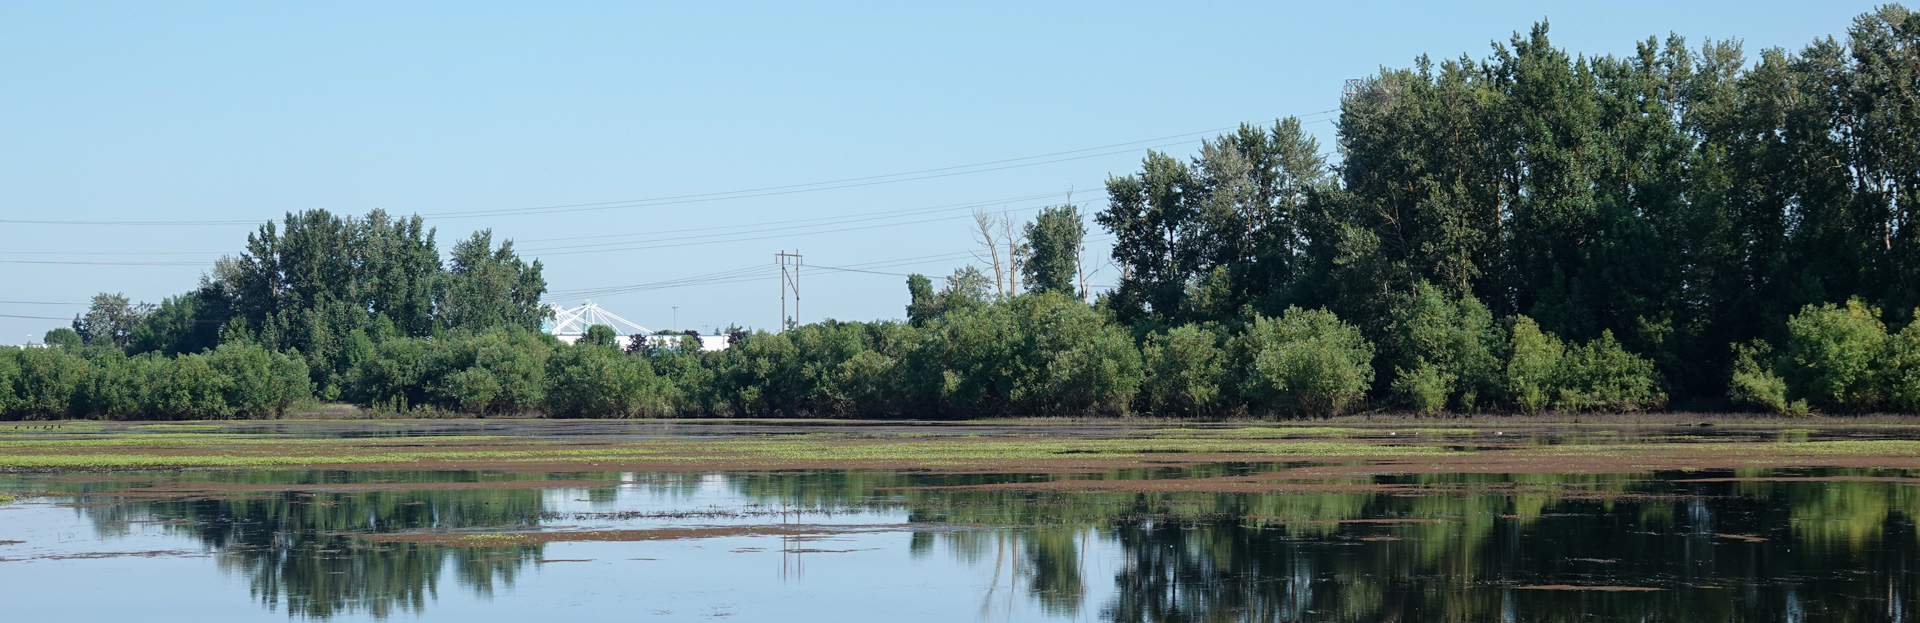 From the Archive: Urban Wetlands: Koll Center and Smith & Bybee Lakes, Summer 2022